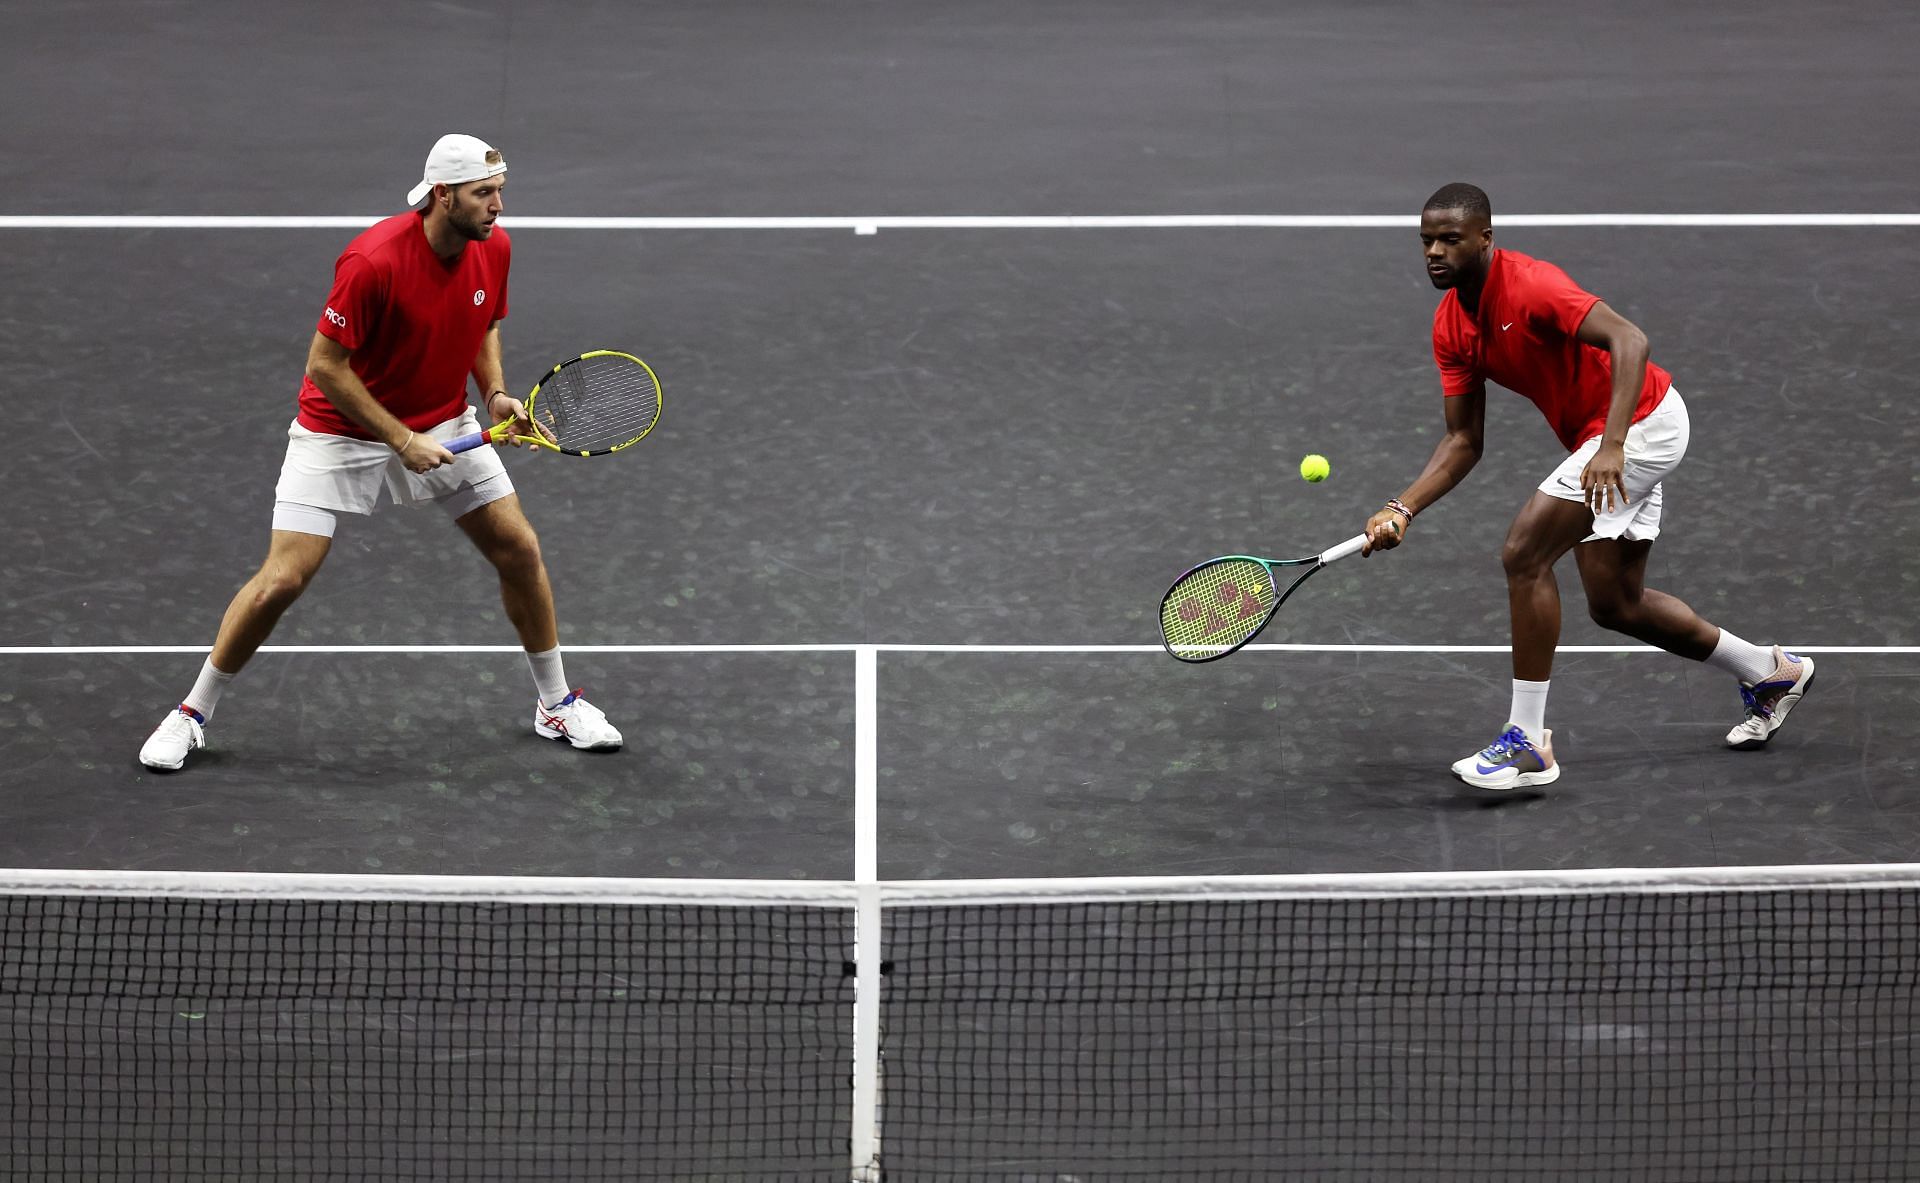 Jack Sock and Frances Tiafoe in action during their doubles match against Roger Federer and Rafael Nadal at the Laver Cup 2022